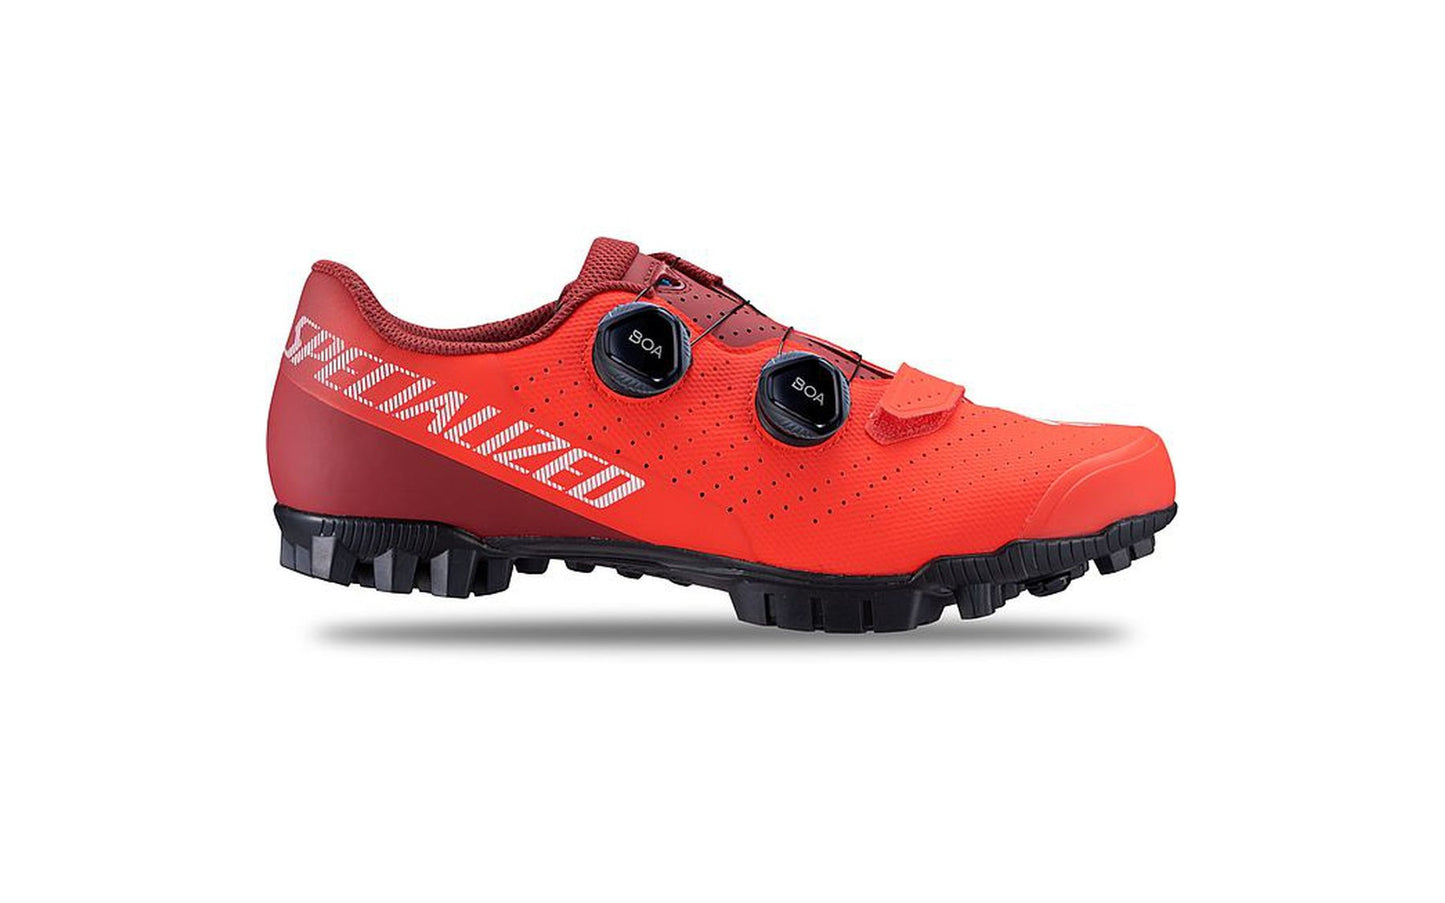 Recon 3.0 Mountain Bike Shoes-Specialized